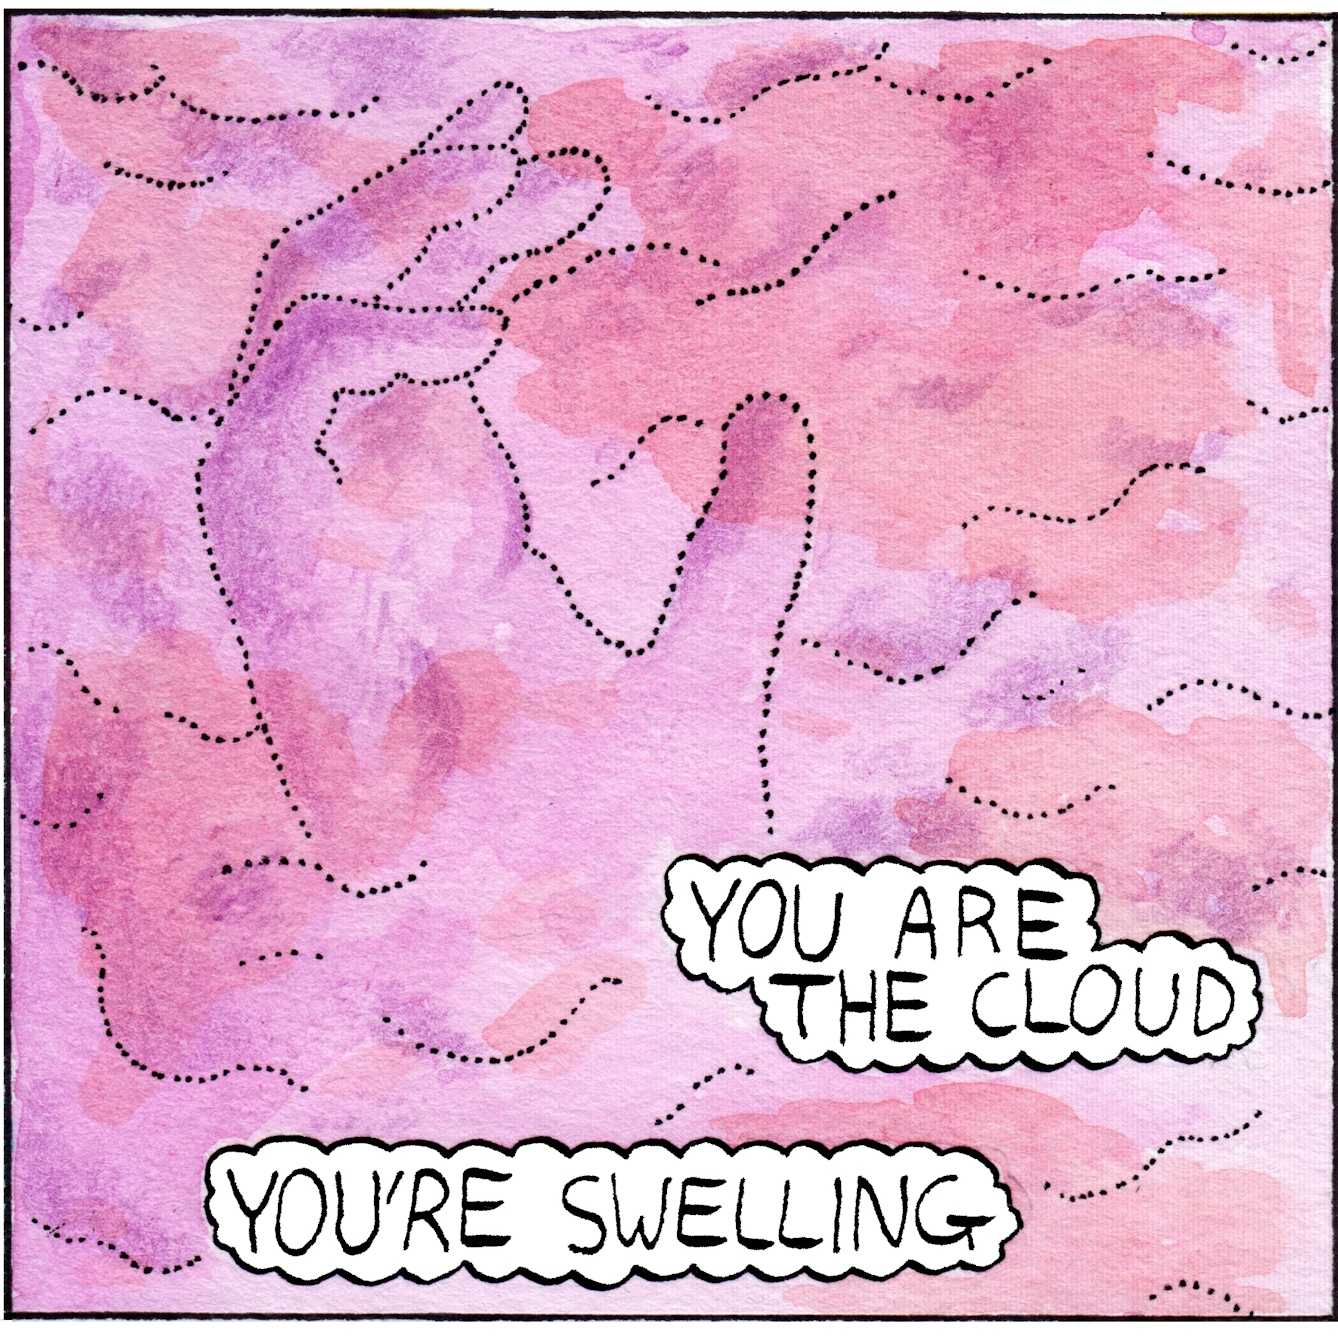 Panel four of the webcomic "Unpaid break". the entire panel is taken up by pink fluffy cloud. A human hand shape is emerging in the centre, also made up of pink cloud. Two text bubbles say "You are a cloud", "You're swelling".